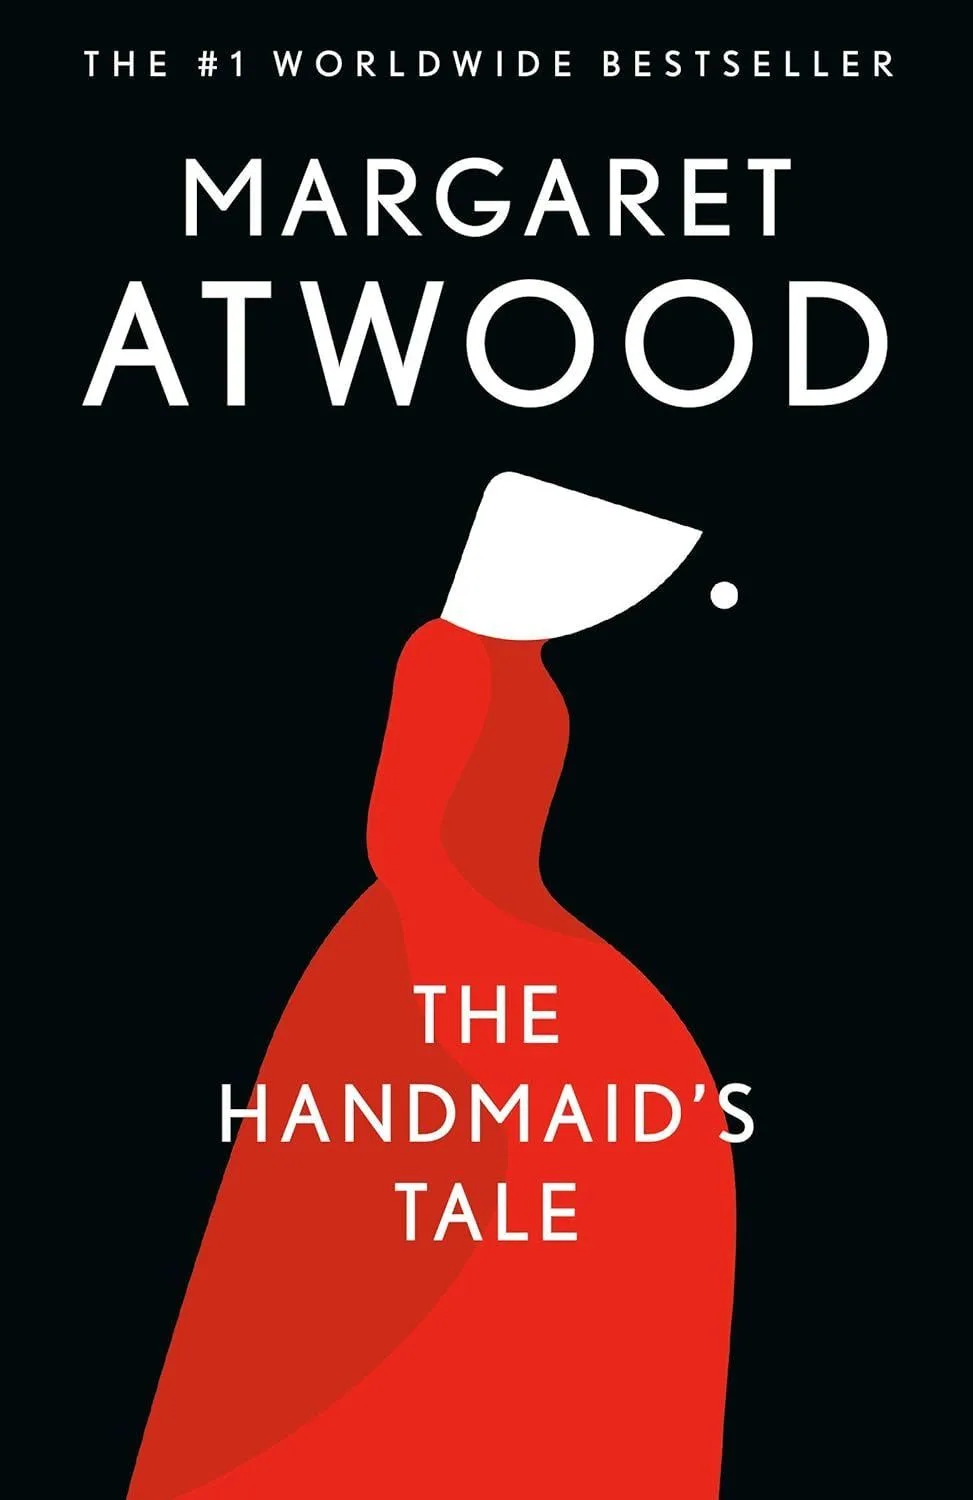 <i>The Handmaid’s Tale</i> by Margaret Atwood